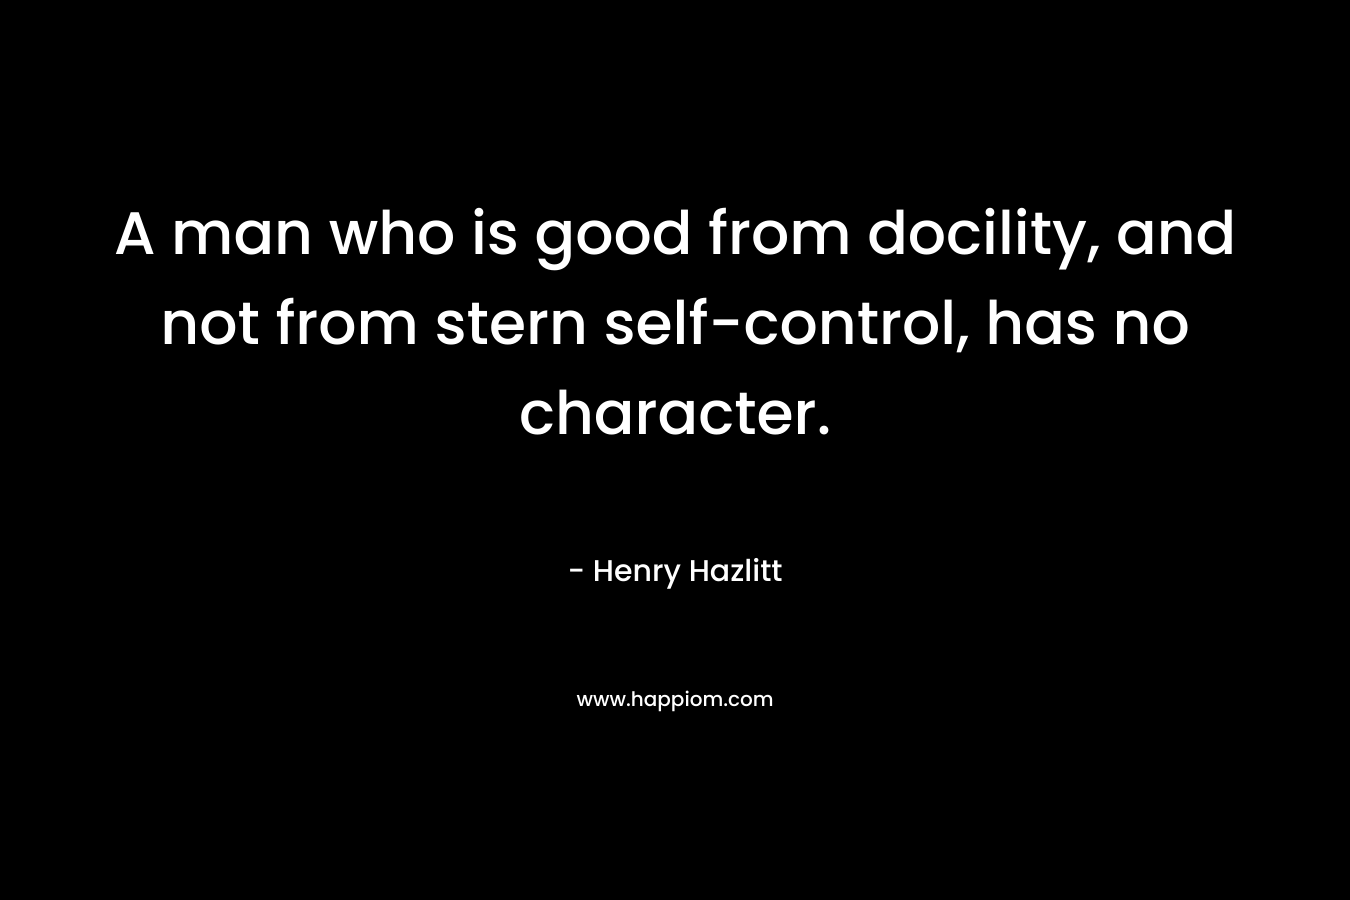 A man who is good from docility, and not from stern self-control, has no character.